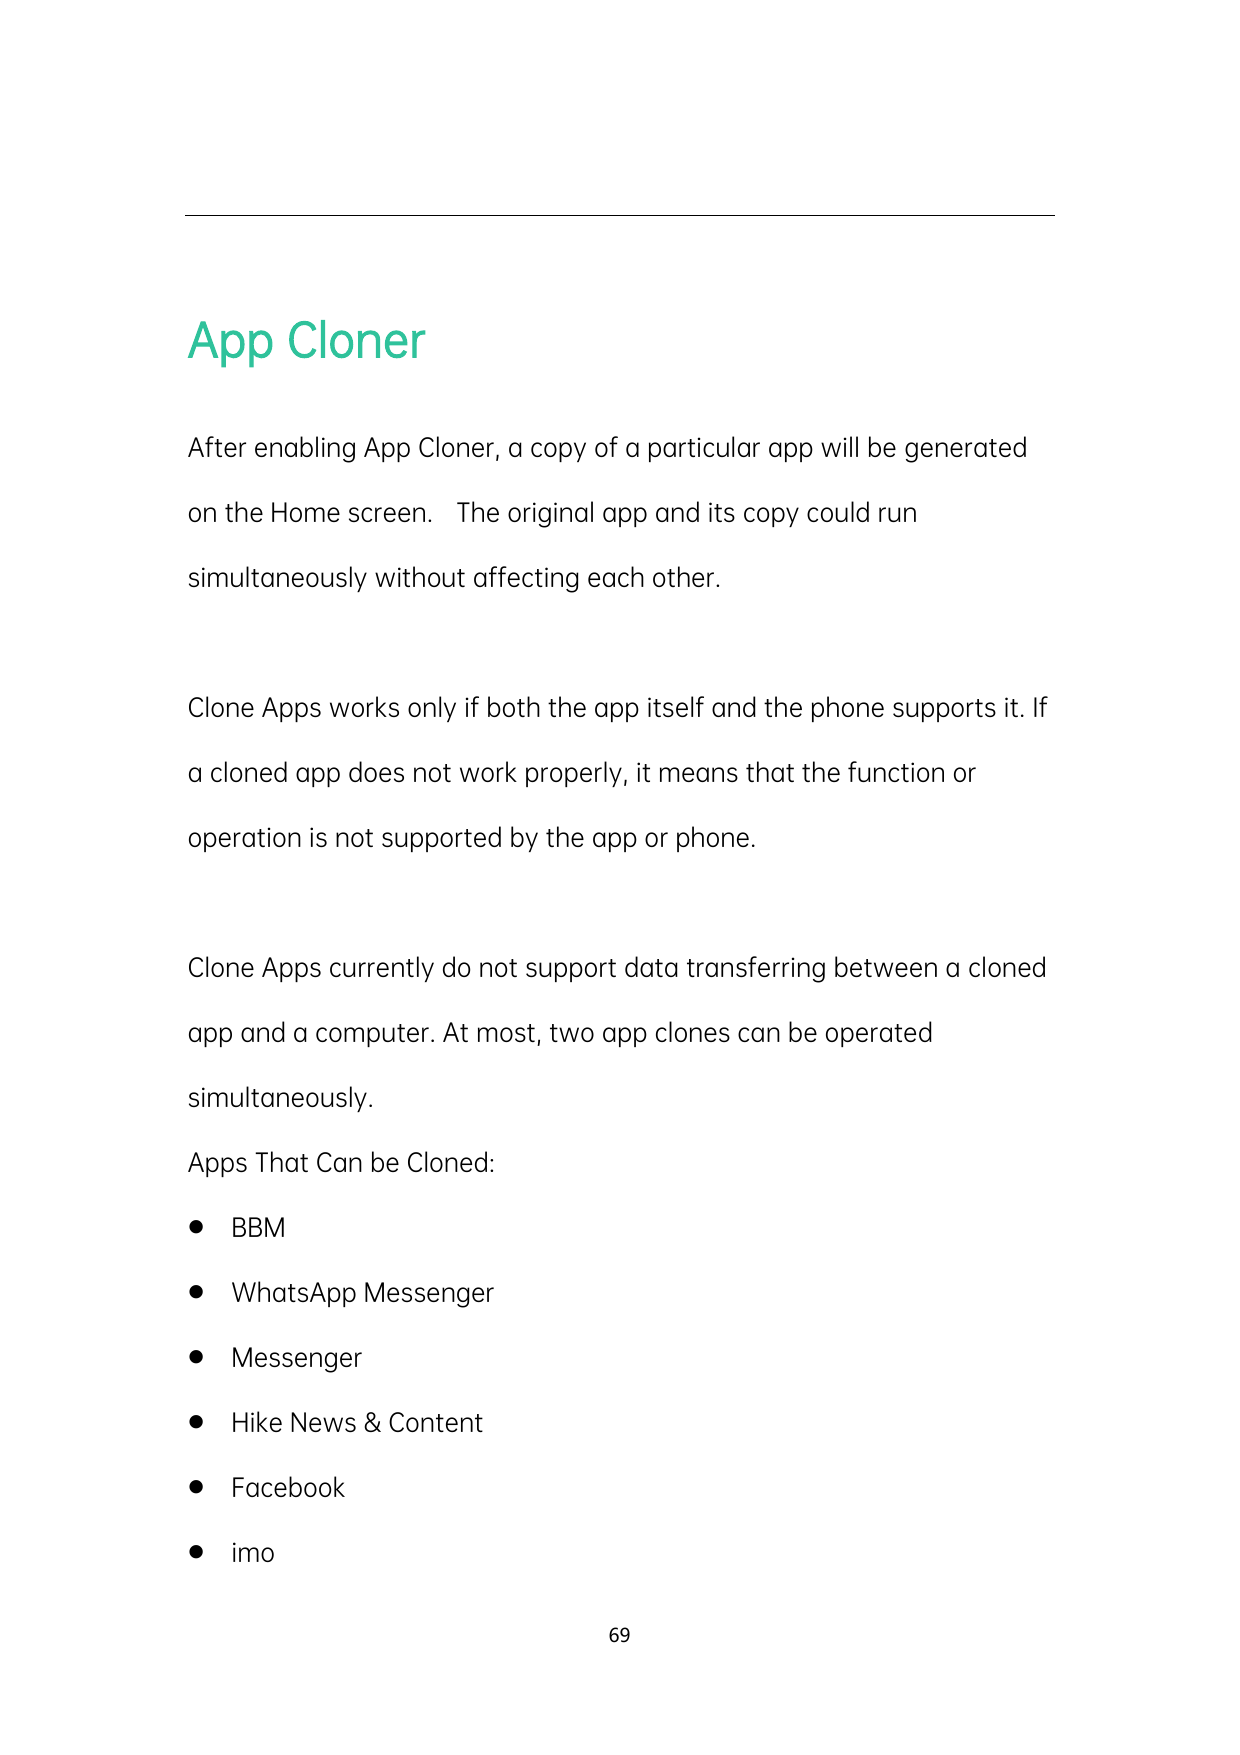 App ClonerAfter enabling App Cloner, a copy of a particular app will be generatedon the Home screen.The original app and its cop